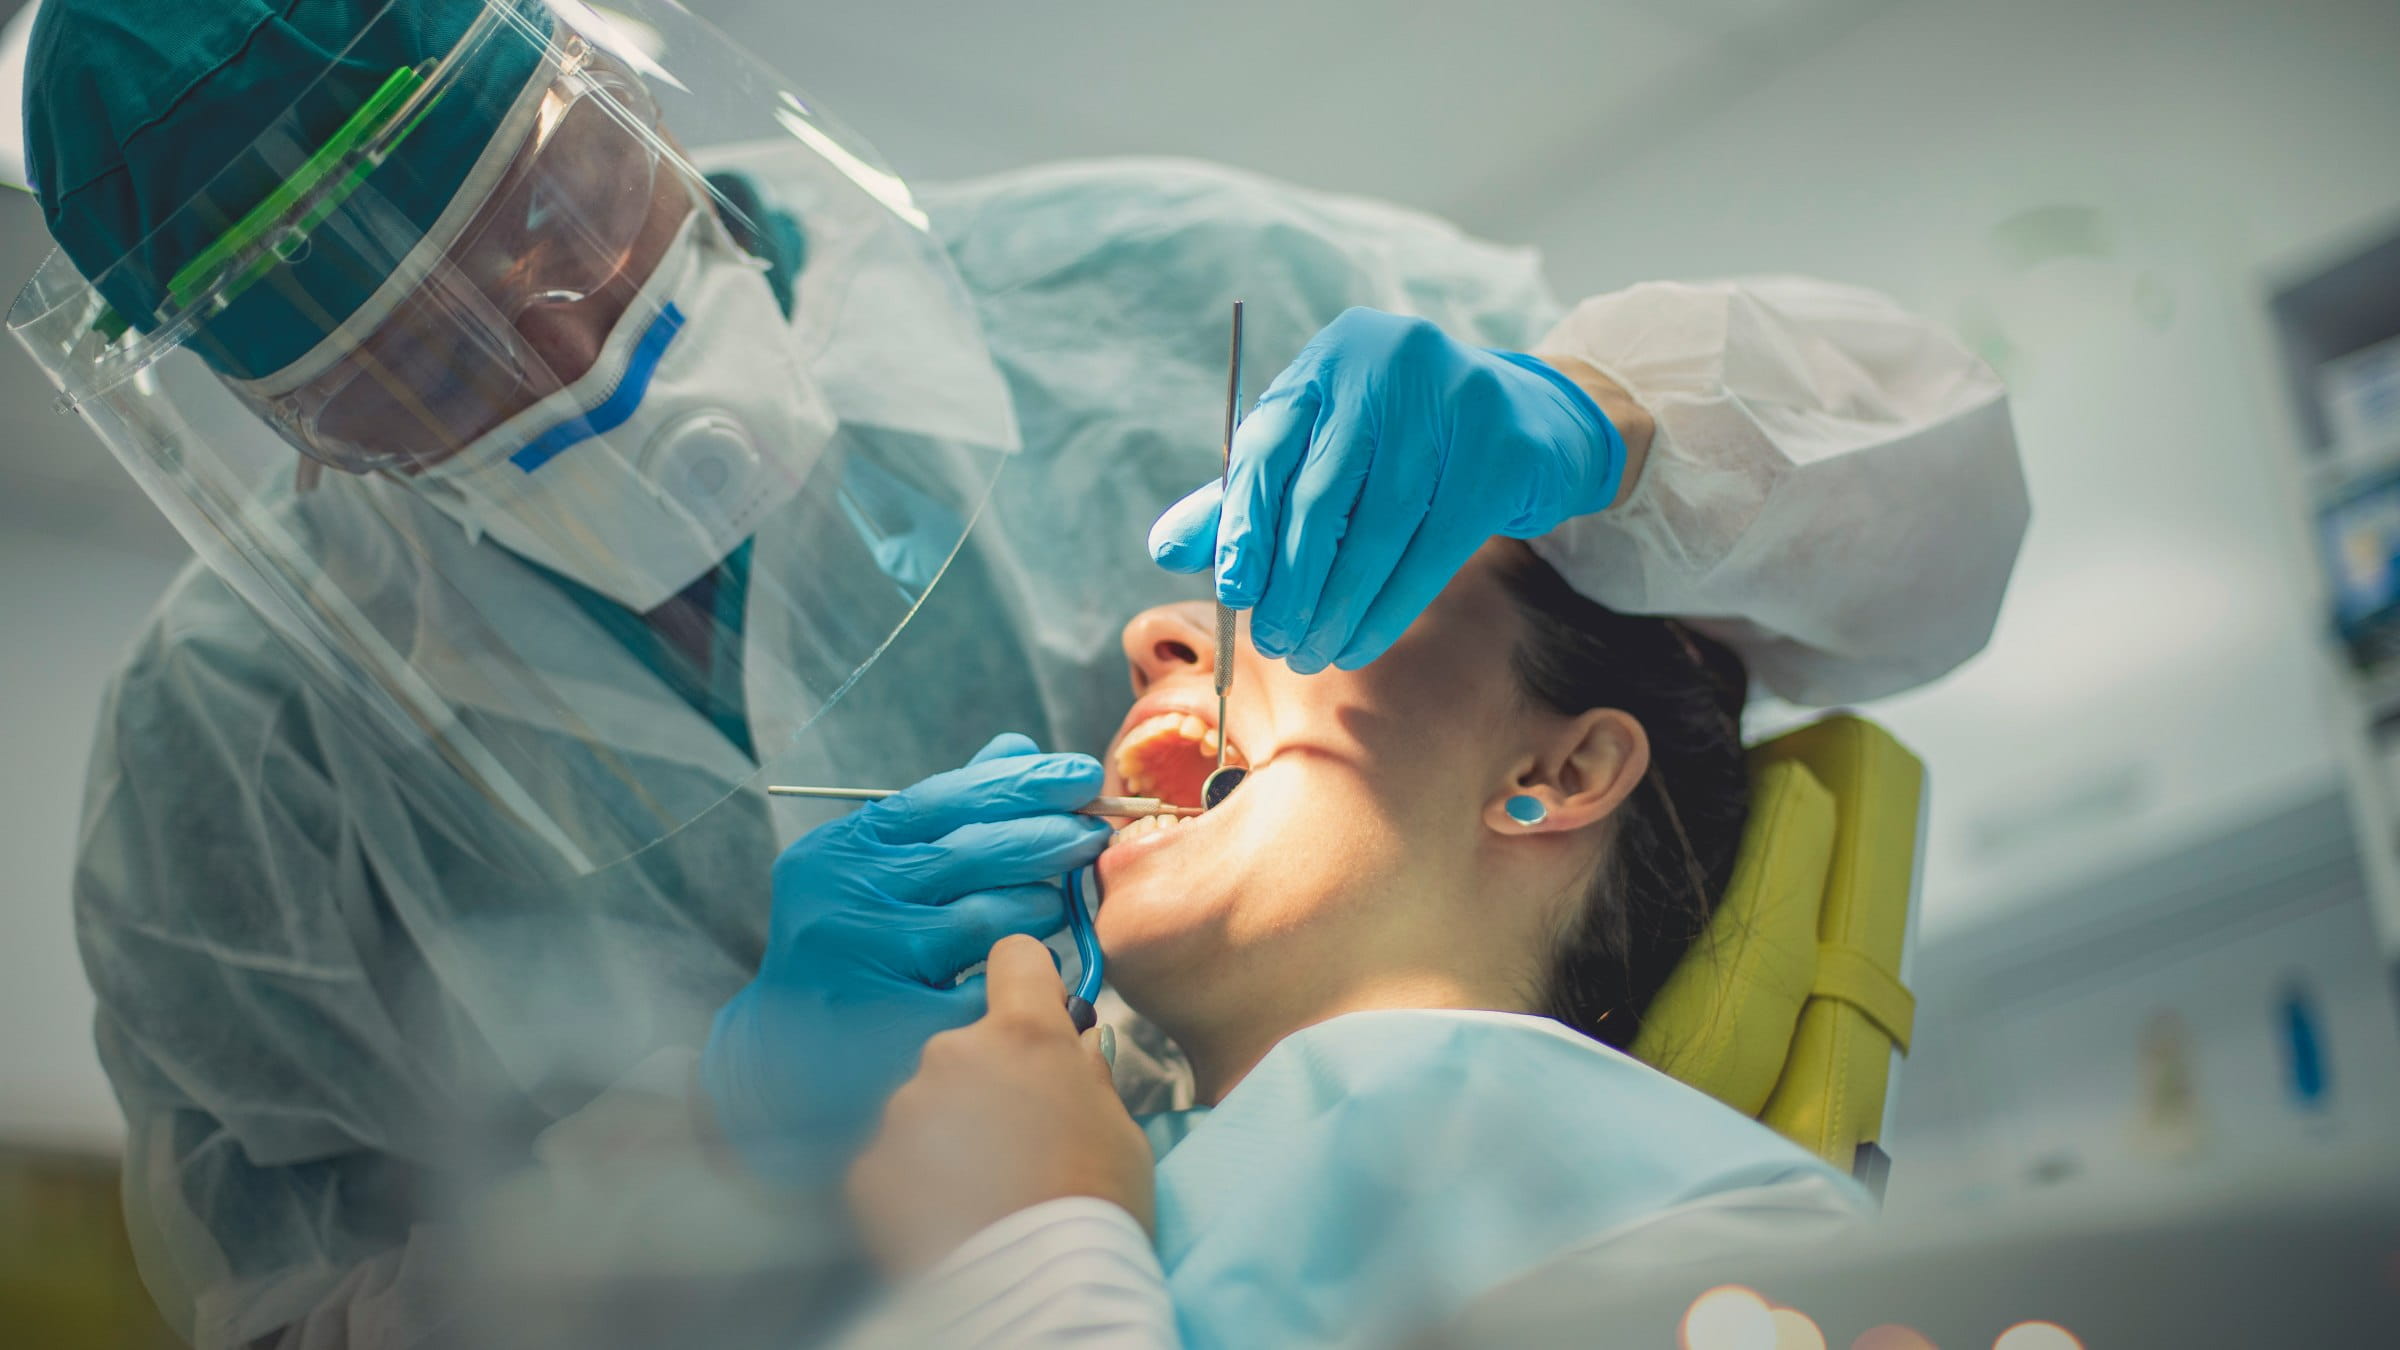 Is a rise in teeth clenching leading to ‘pandemic teeth’?